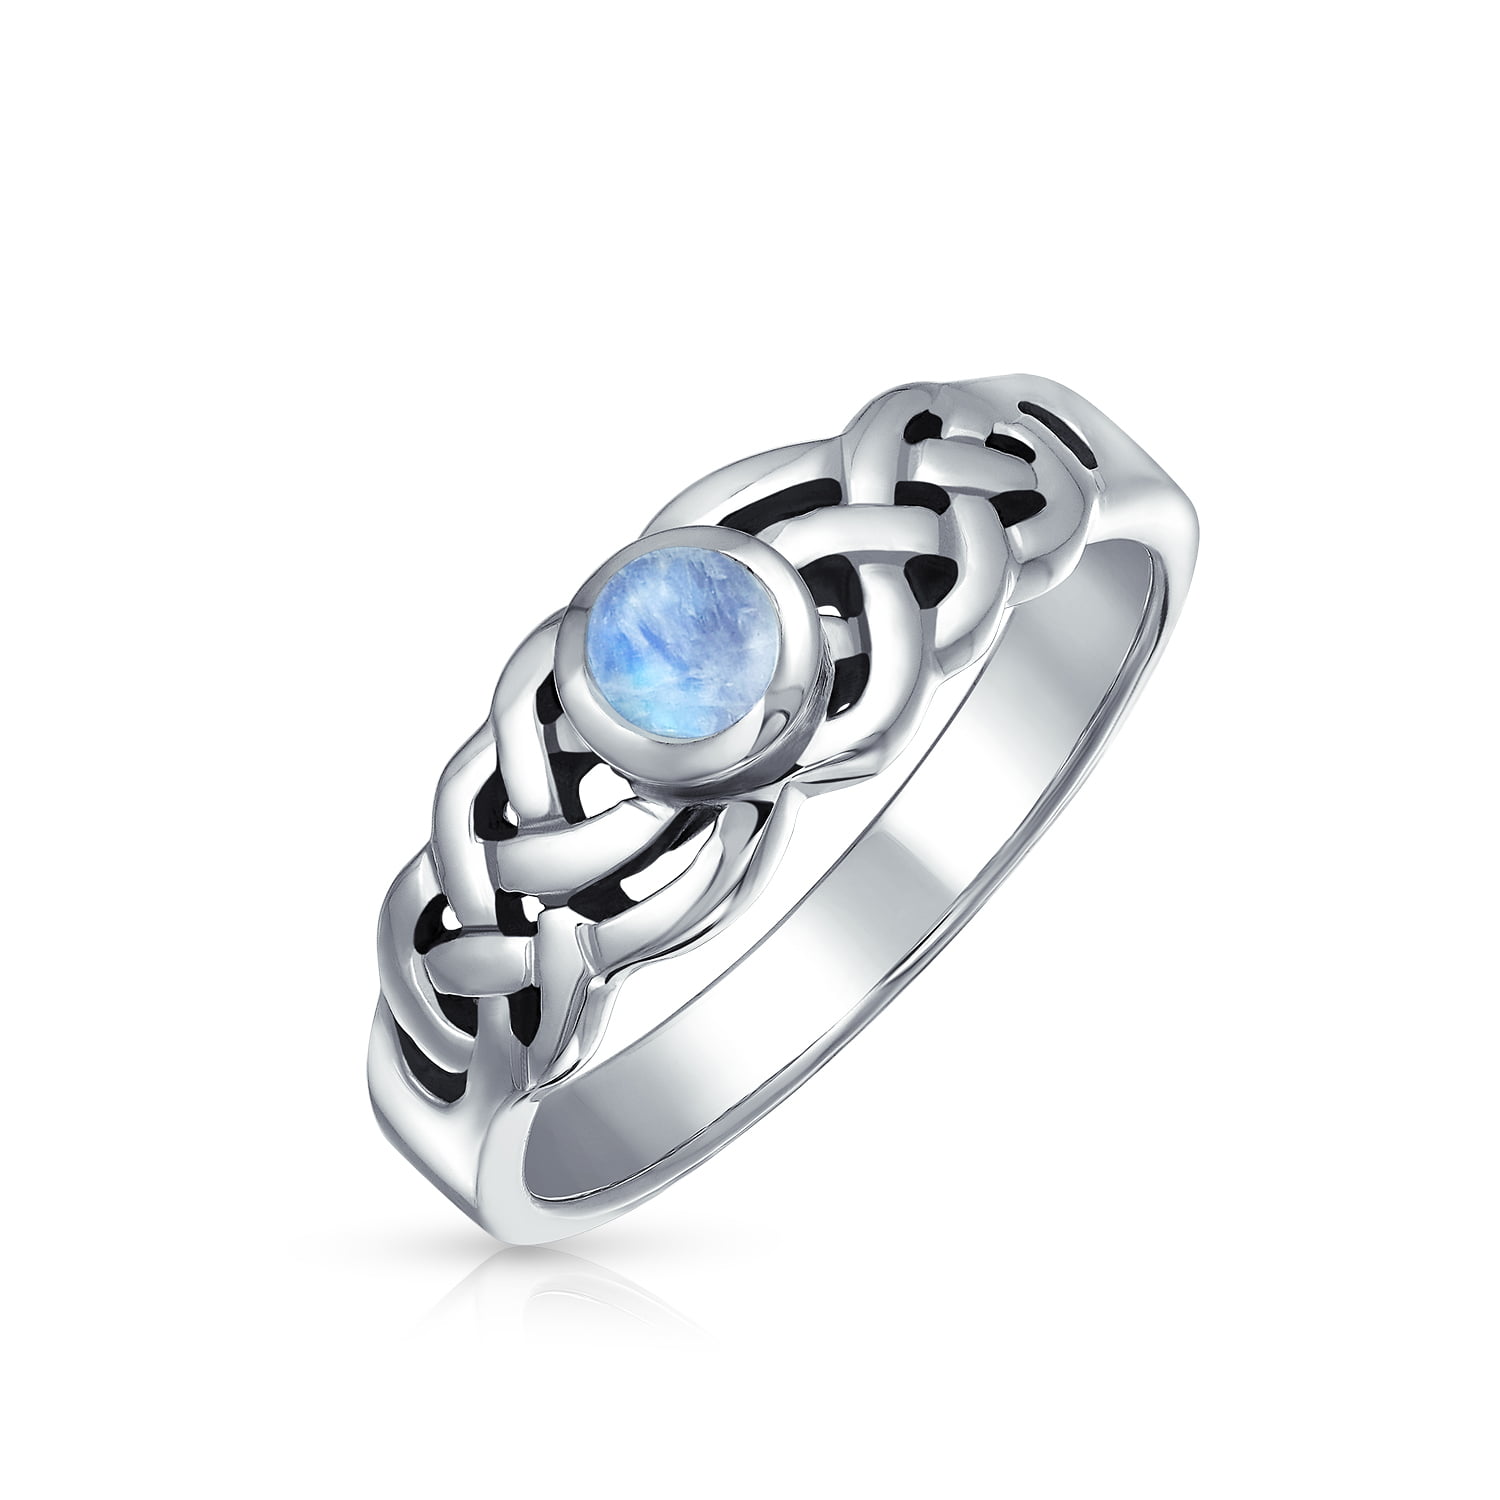 Bling Jewelry Celtic Trinity Knot Triquetra Rainbow Moonstone Ring